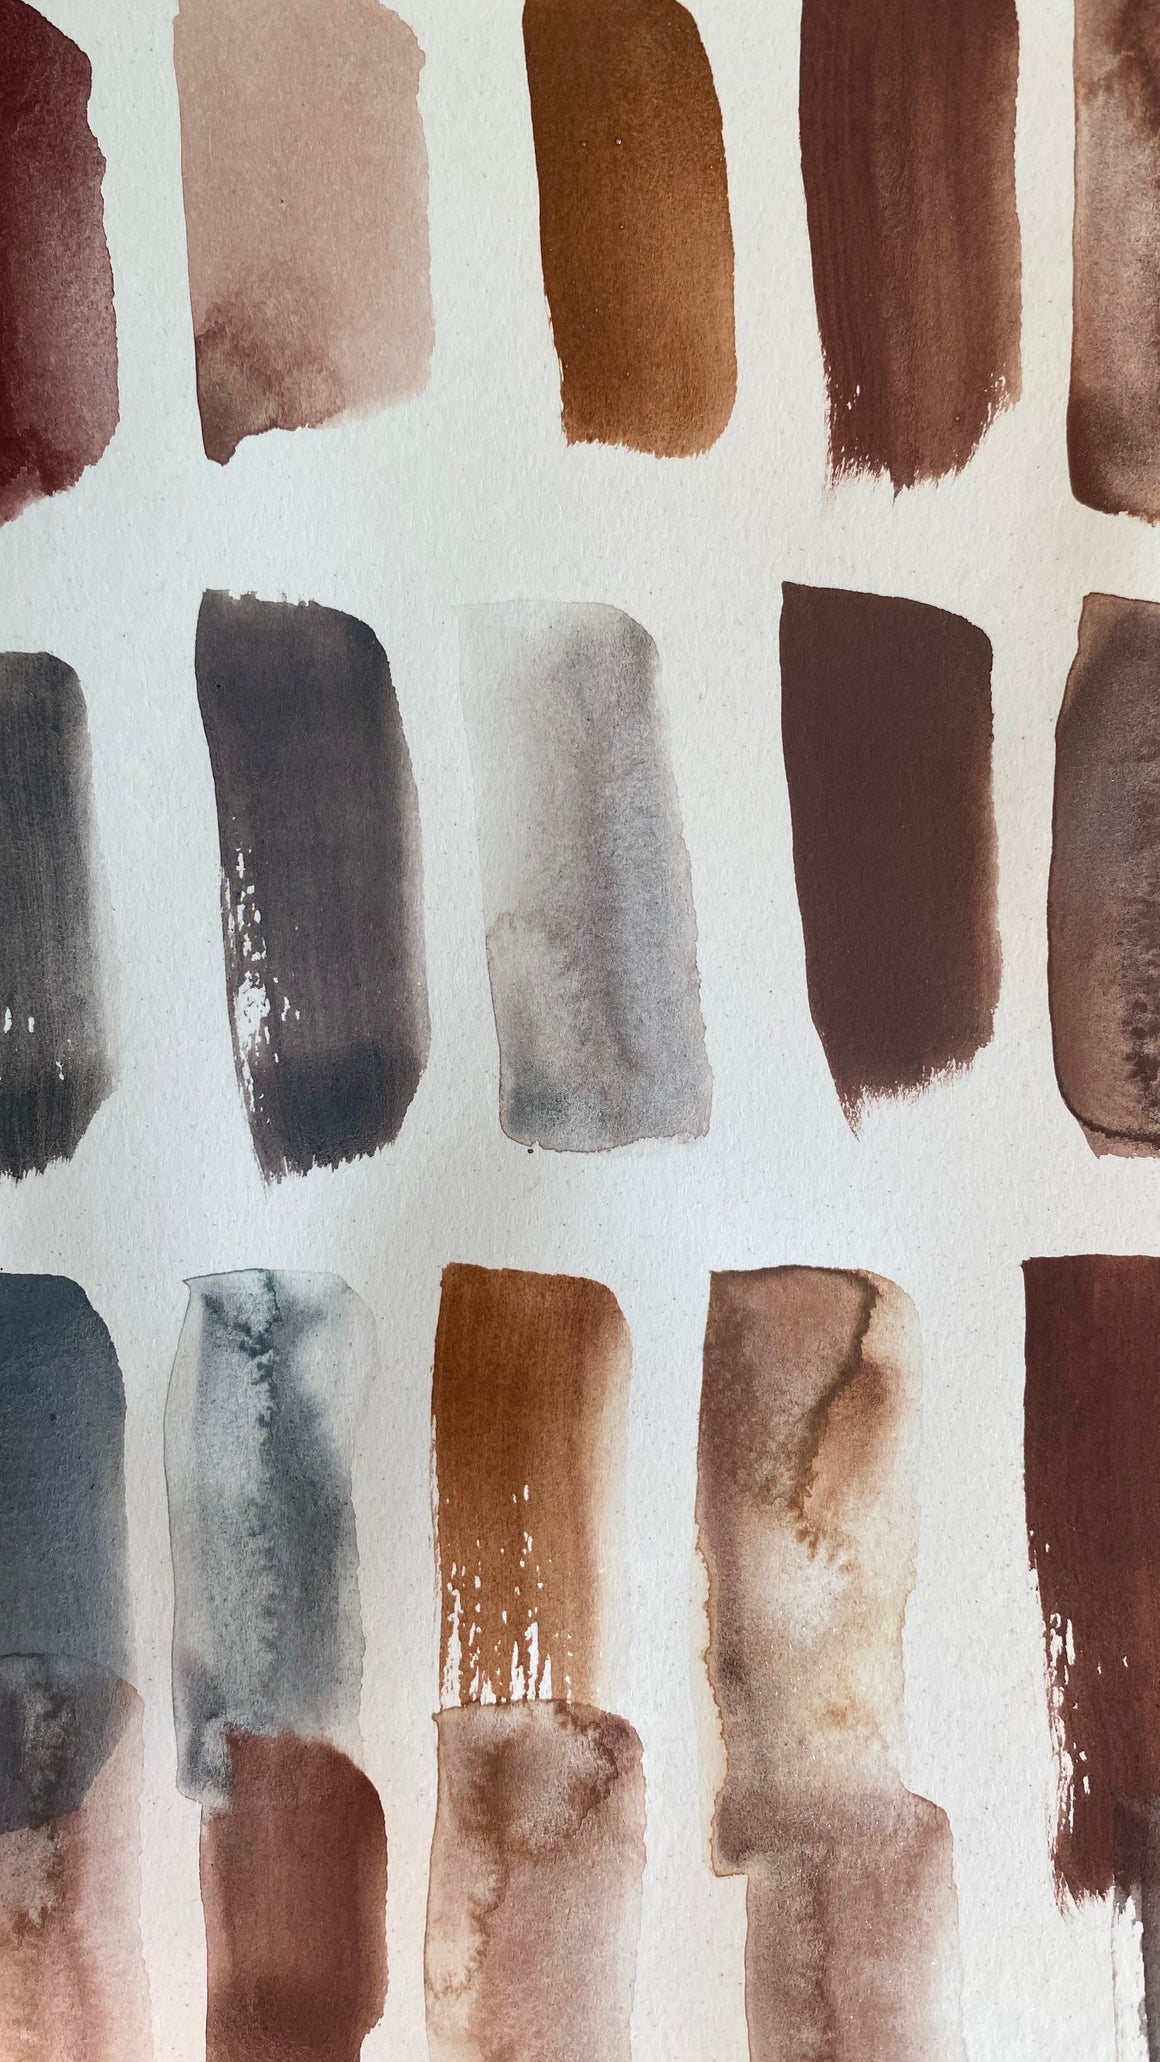 SHADES of LOVE hand-mixed #tracibautistaCOLOR pigment kit + paint making workshop